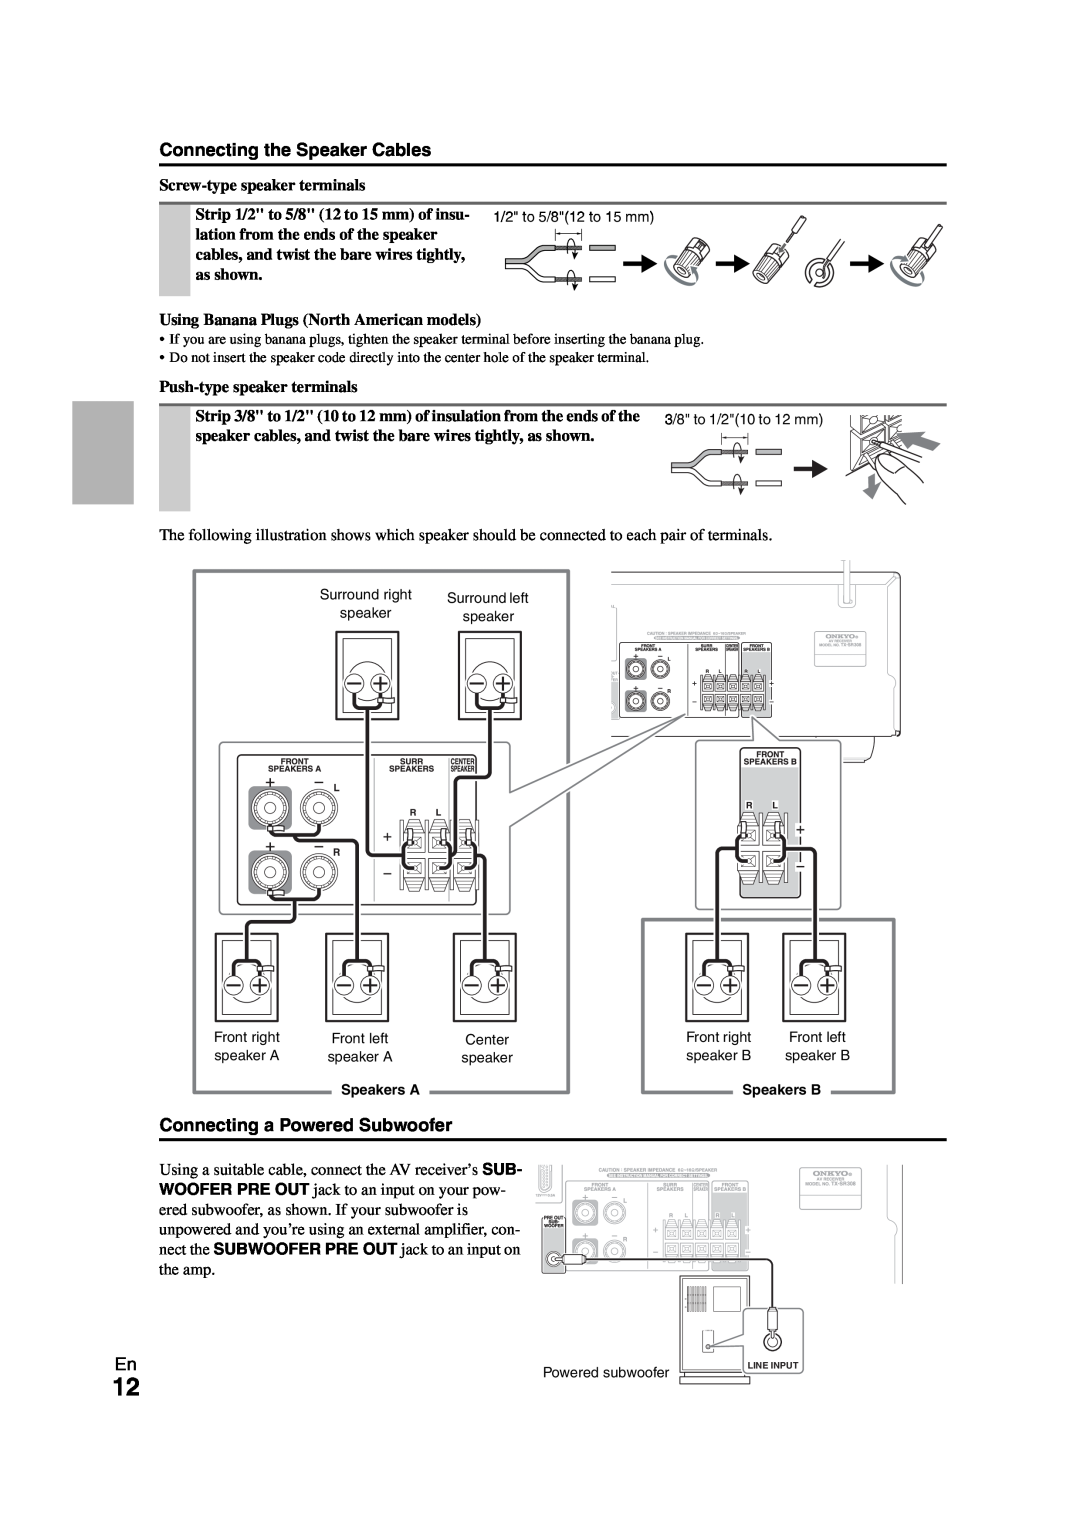 Onkyo SR308 instruction manual Connecting the Speaker Cables, Connecting a Powered Subwoofer 